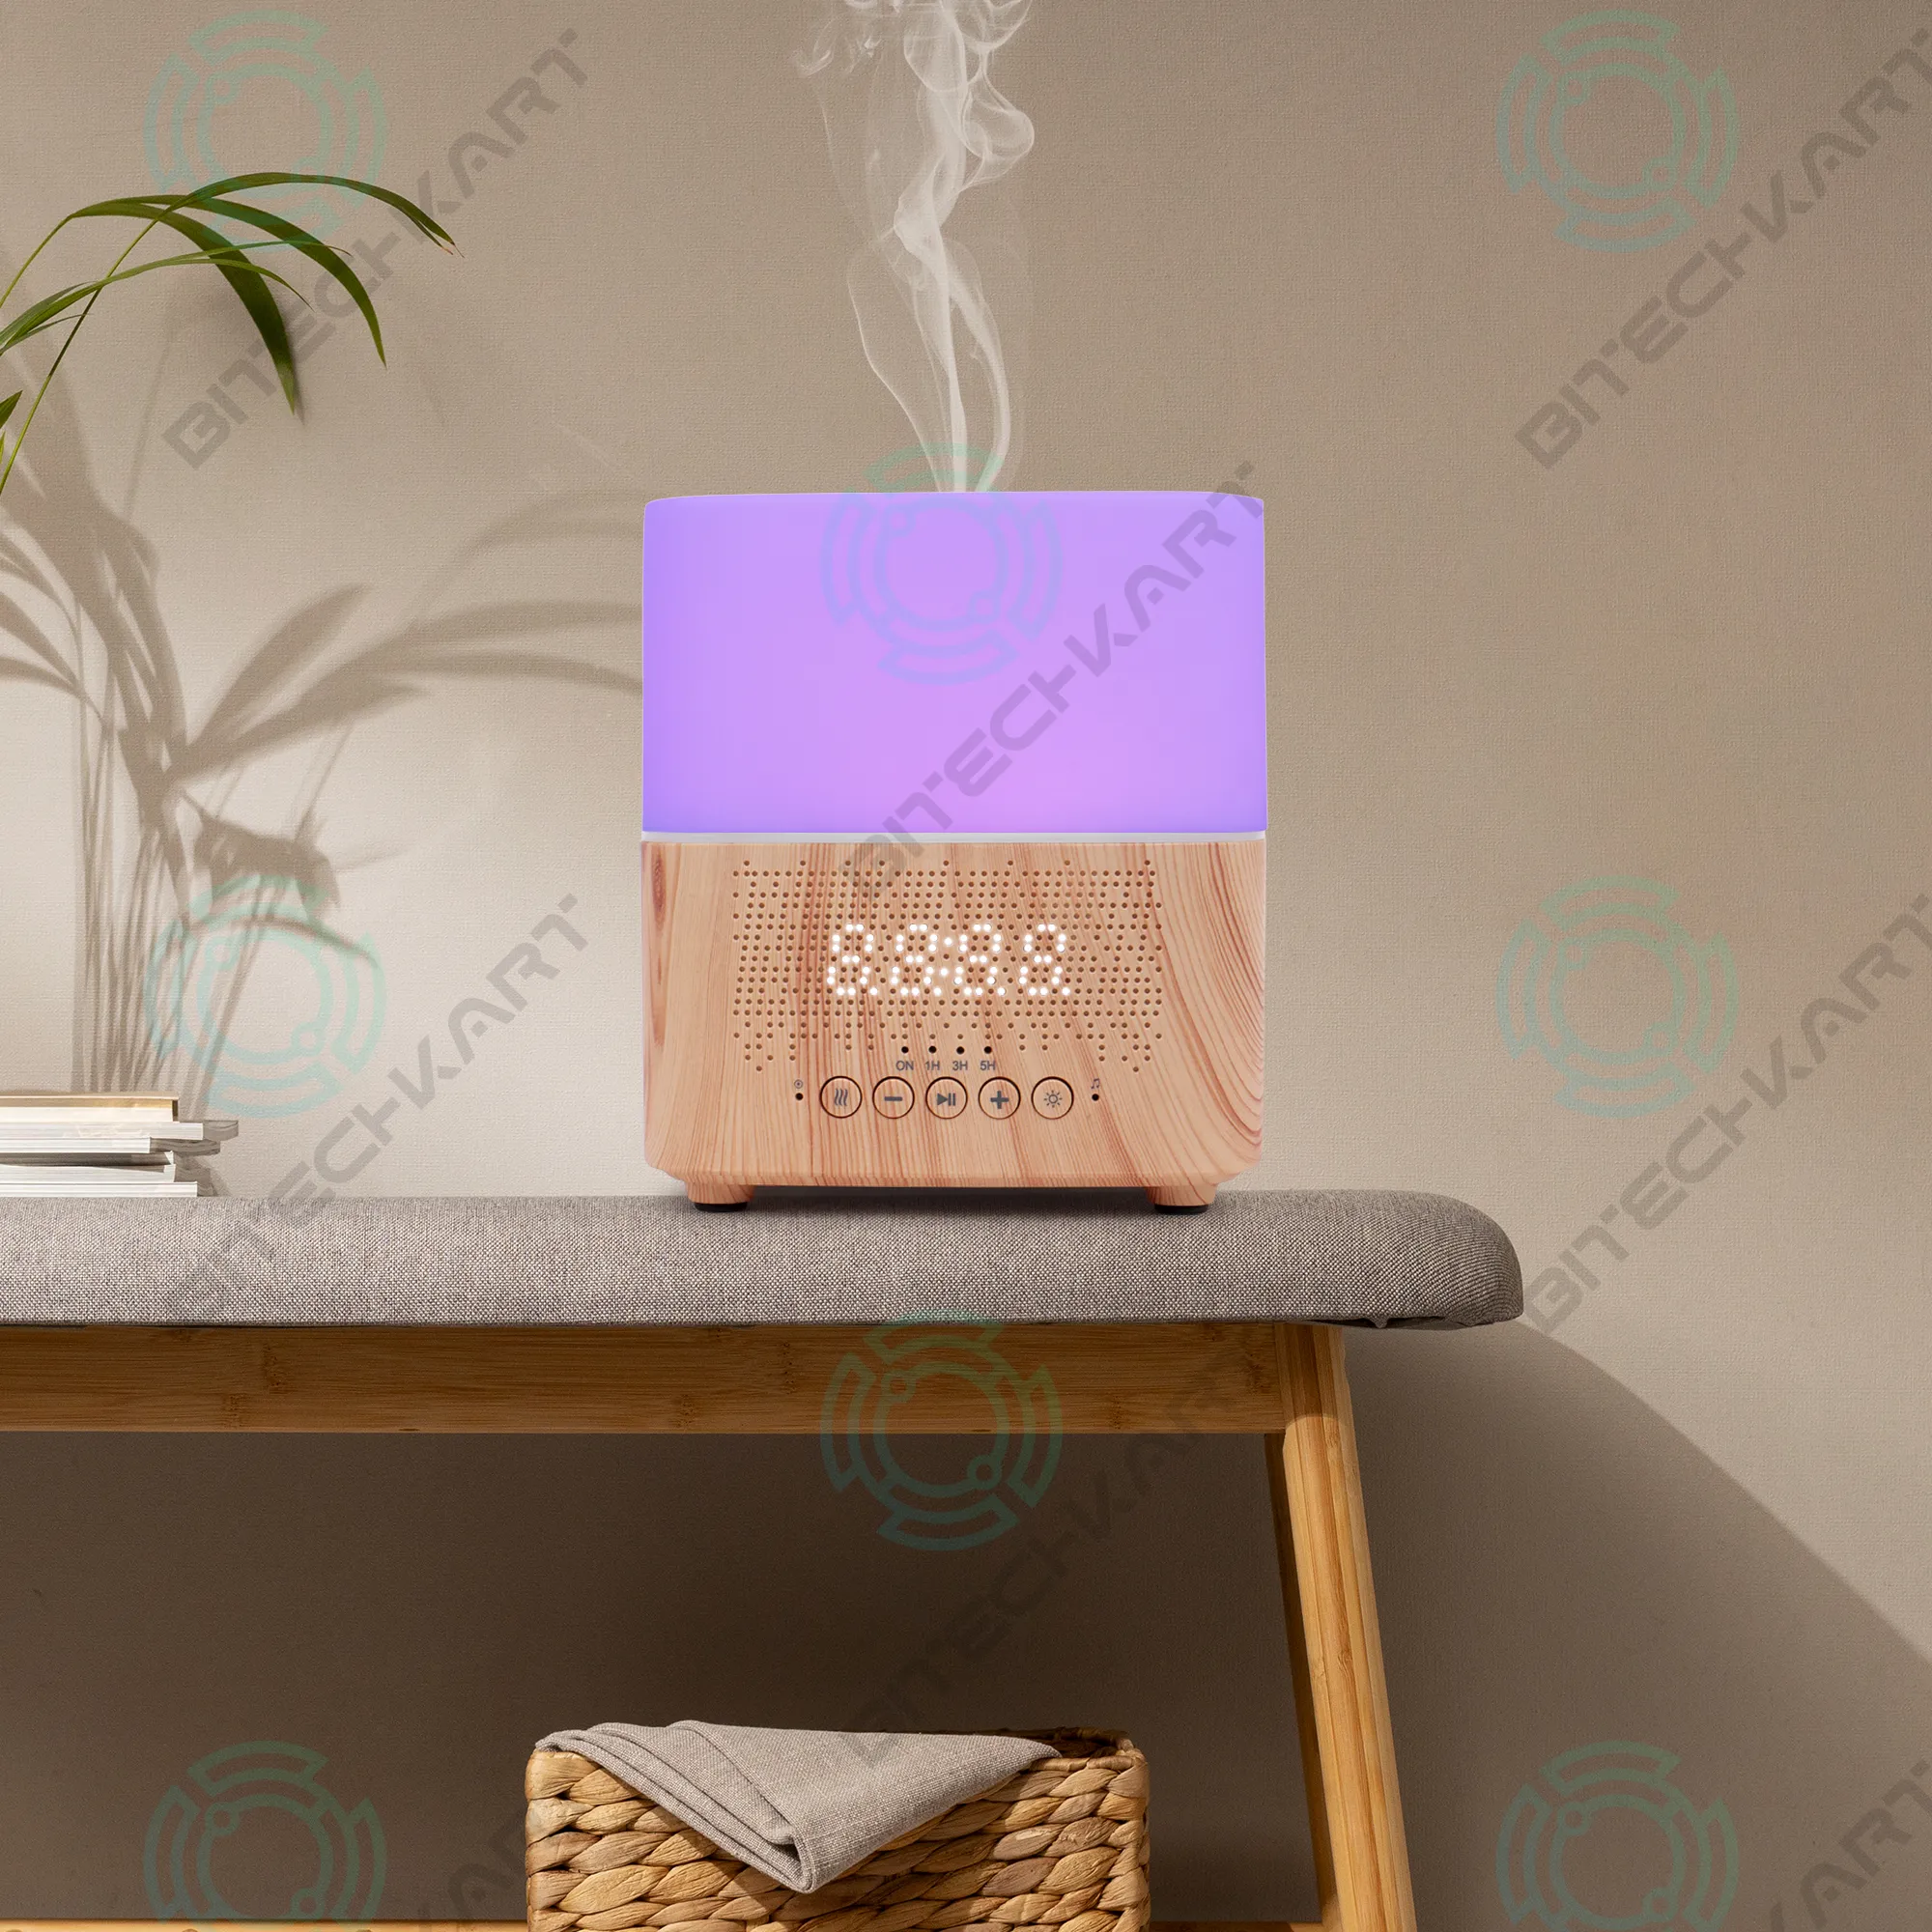 6-in-1 Aromatherapy Humidifier With Bluetooth Speaker and Clock